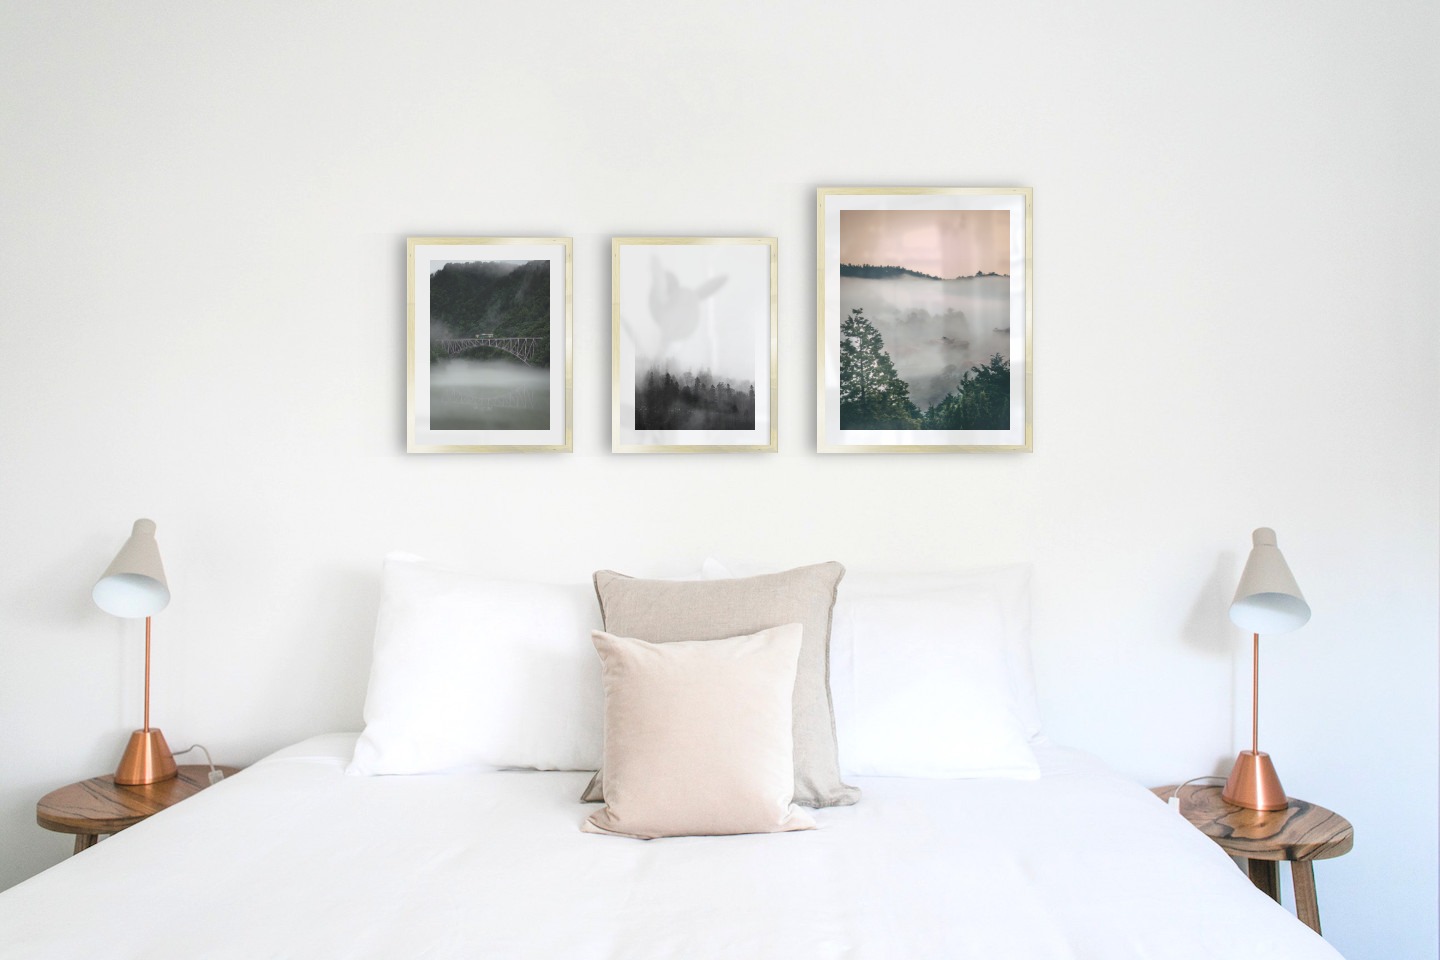 Gallery wall with picture frames in gold in sizes 30x40 and 40x50 with prints "Train over bridge", "Foggy wooden tops" and "Wooden tops and orange sky"